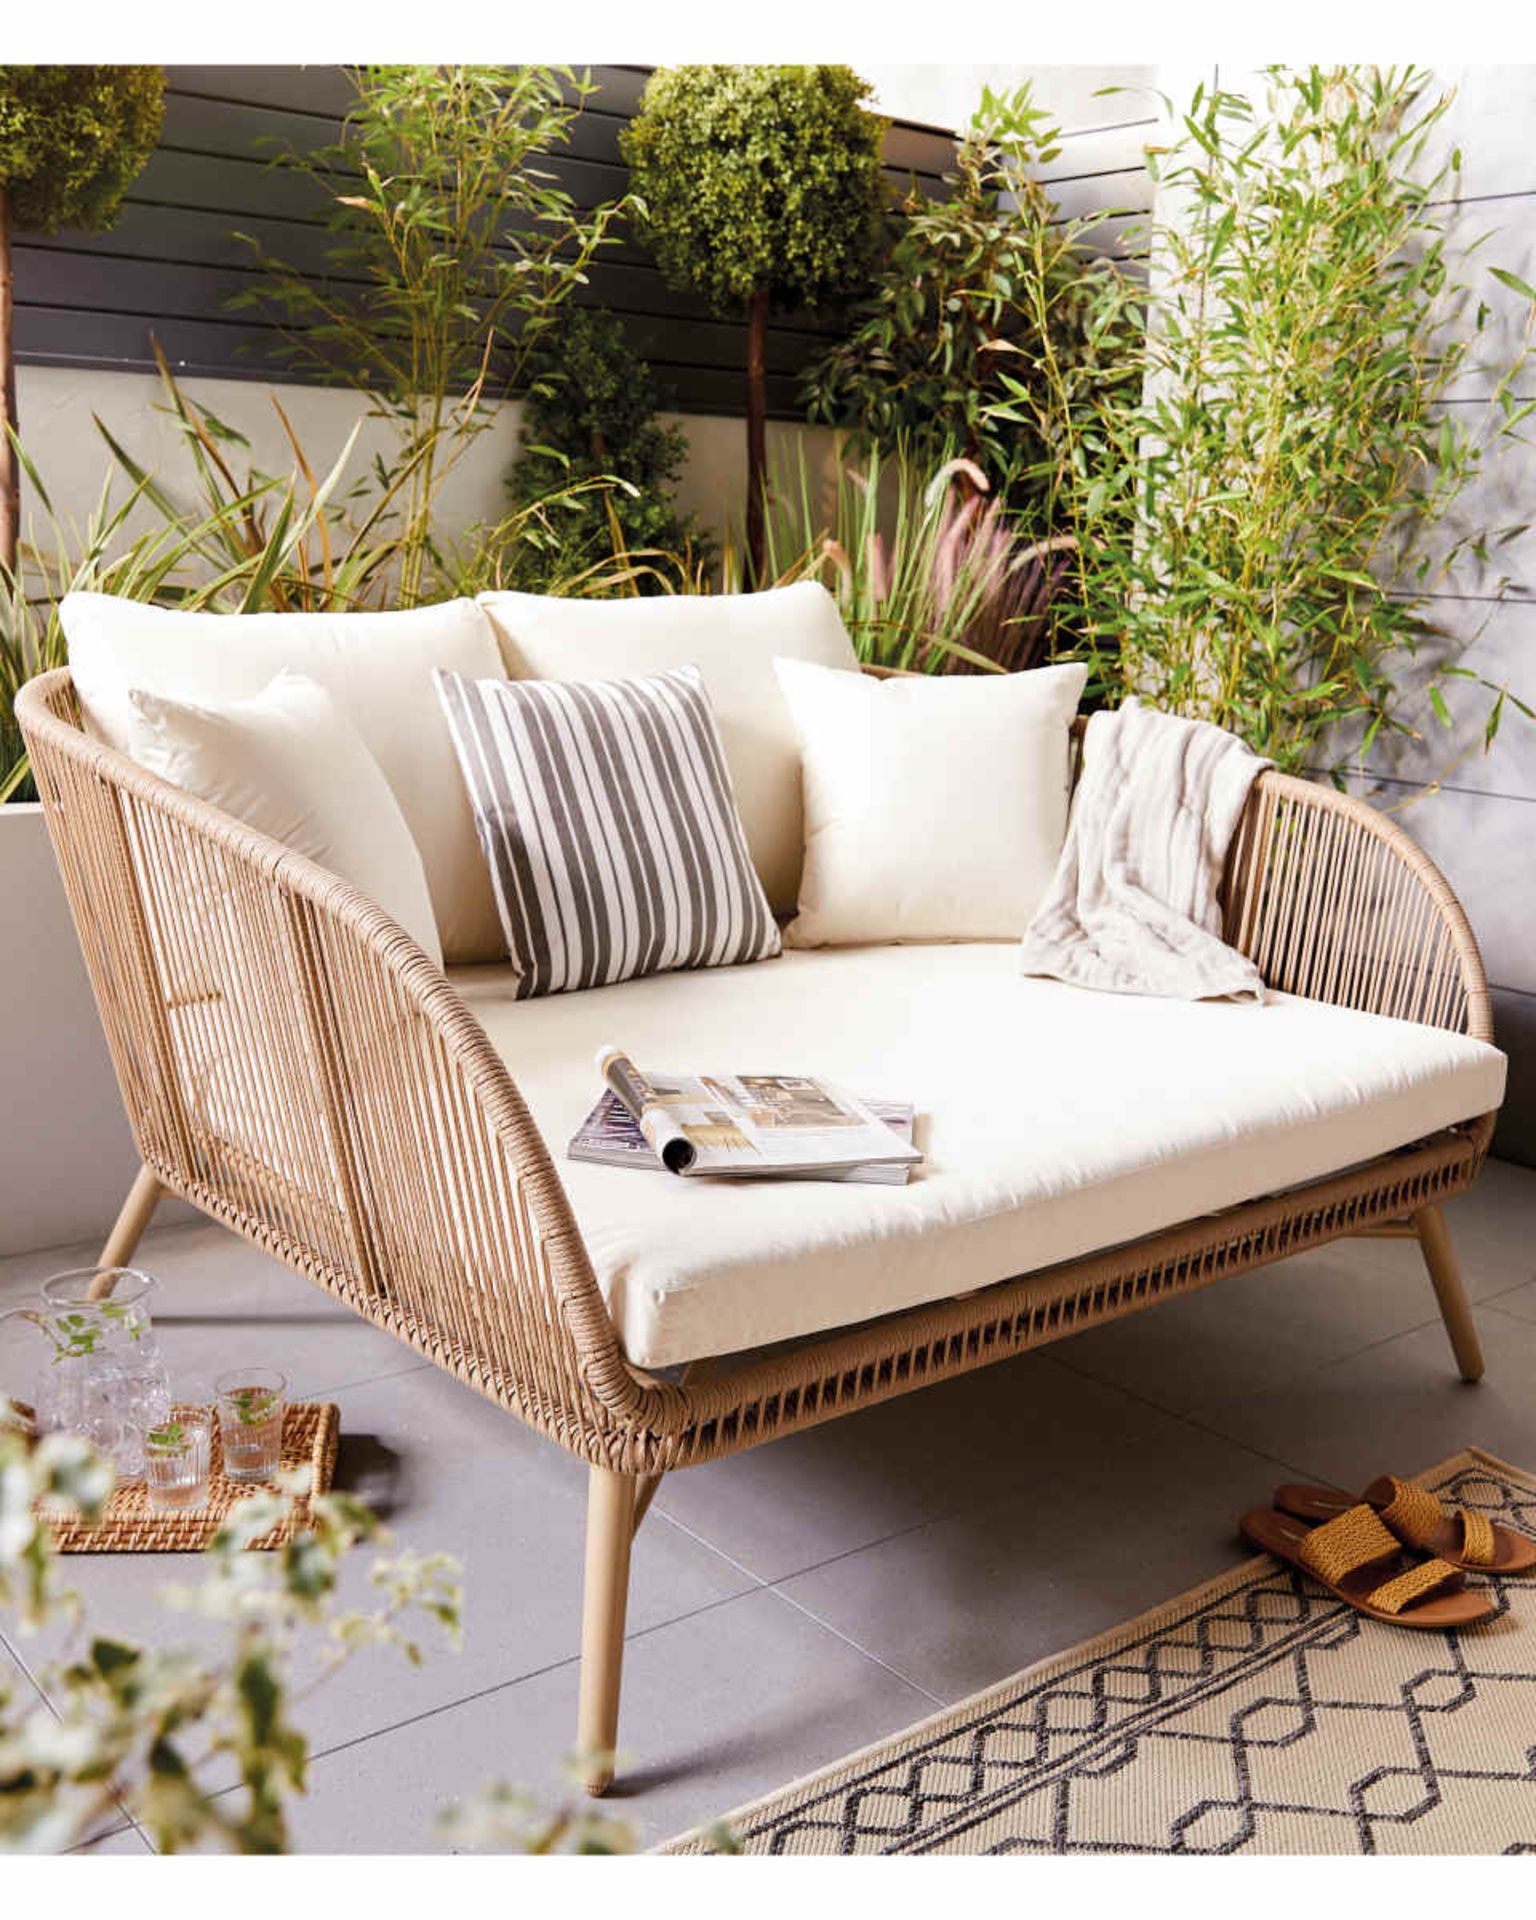 Luxury Rope Effect Snug Seat. Enjoy those lazy days in the garden with this comfortable and - Image 2 of 3